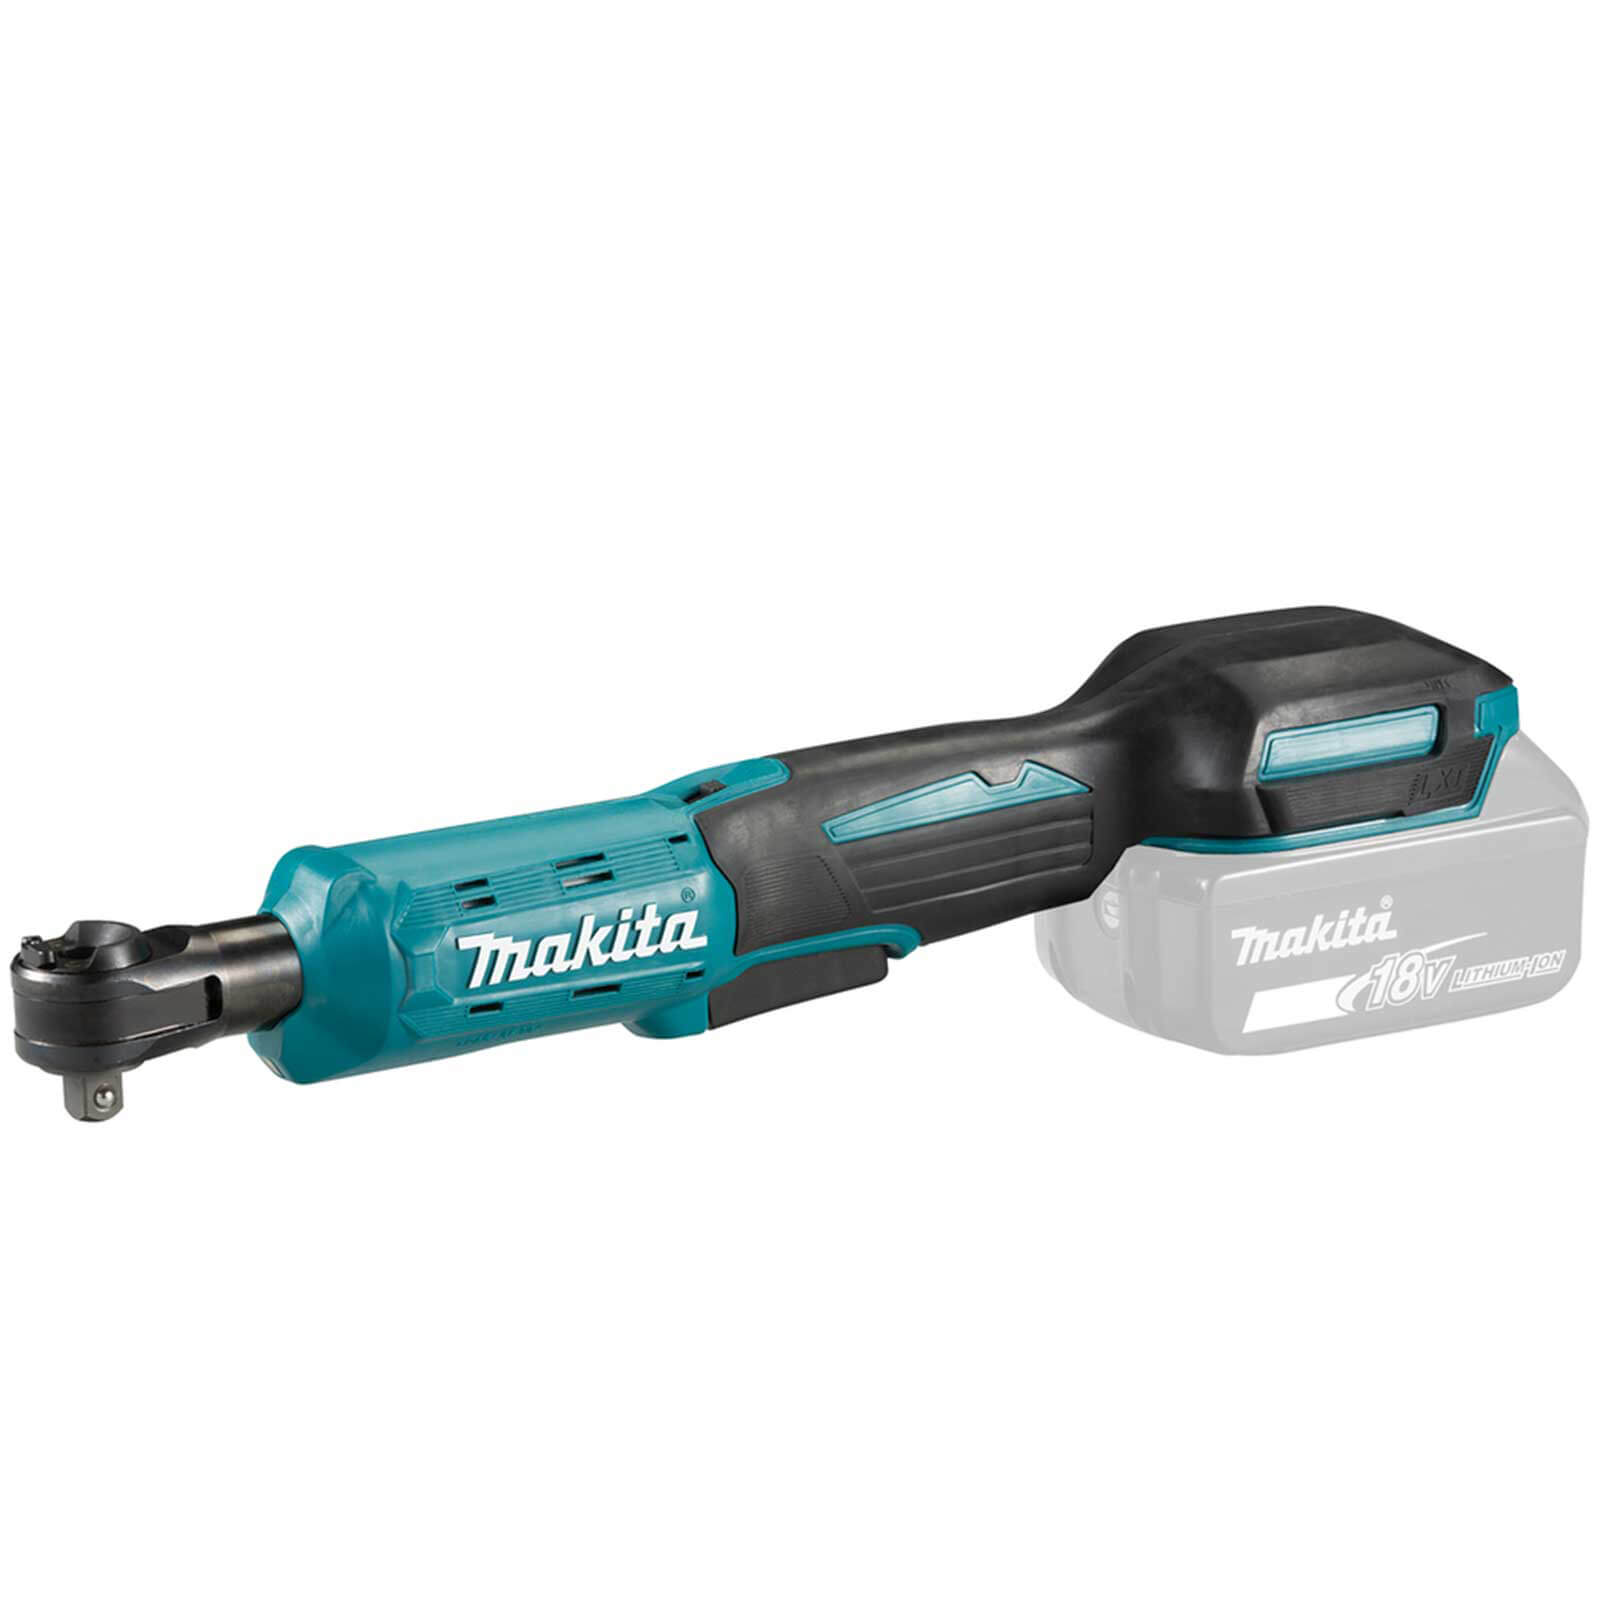 Image of Makita DWR180 18v LXT Cordless Ratchet Wrench No Batteries No Charger Bag